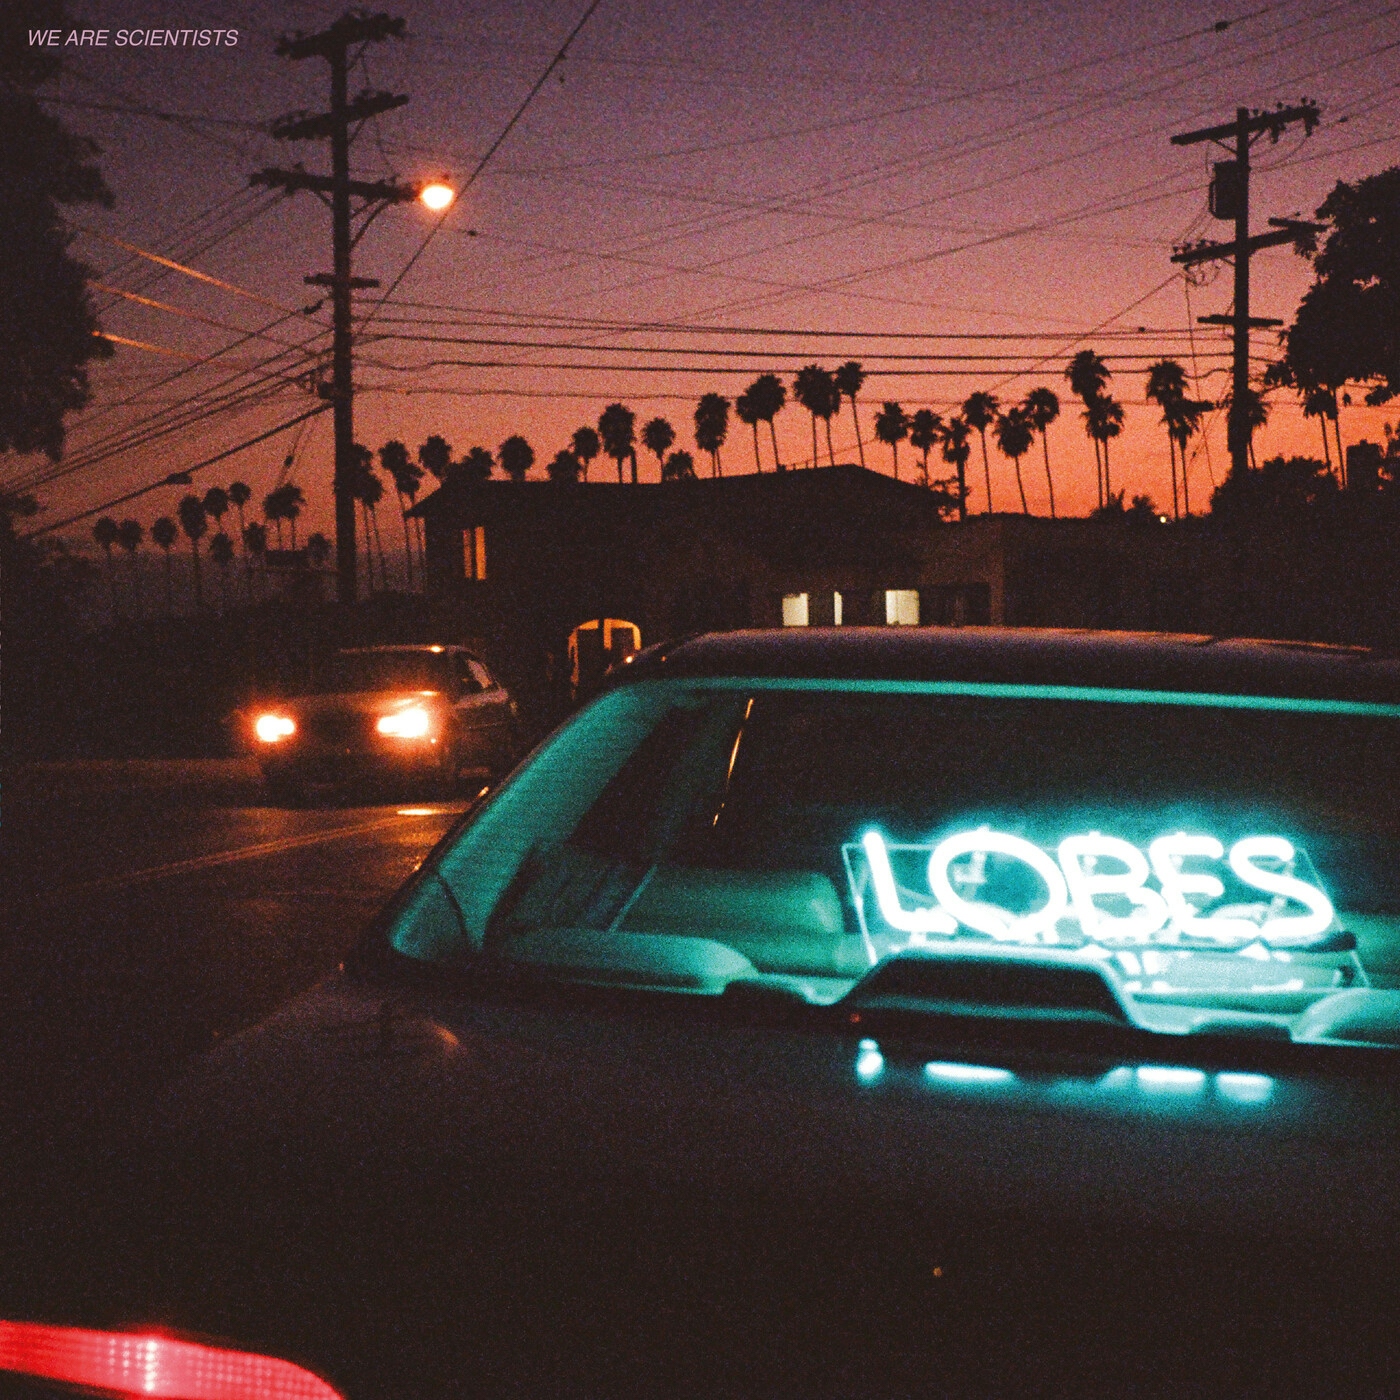 Album artwork for Lobes by We Are Scientists